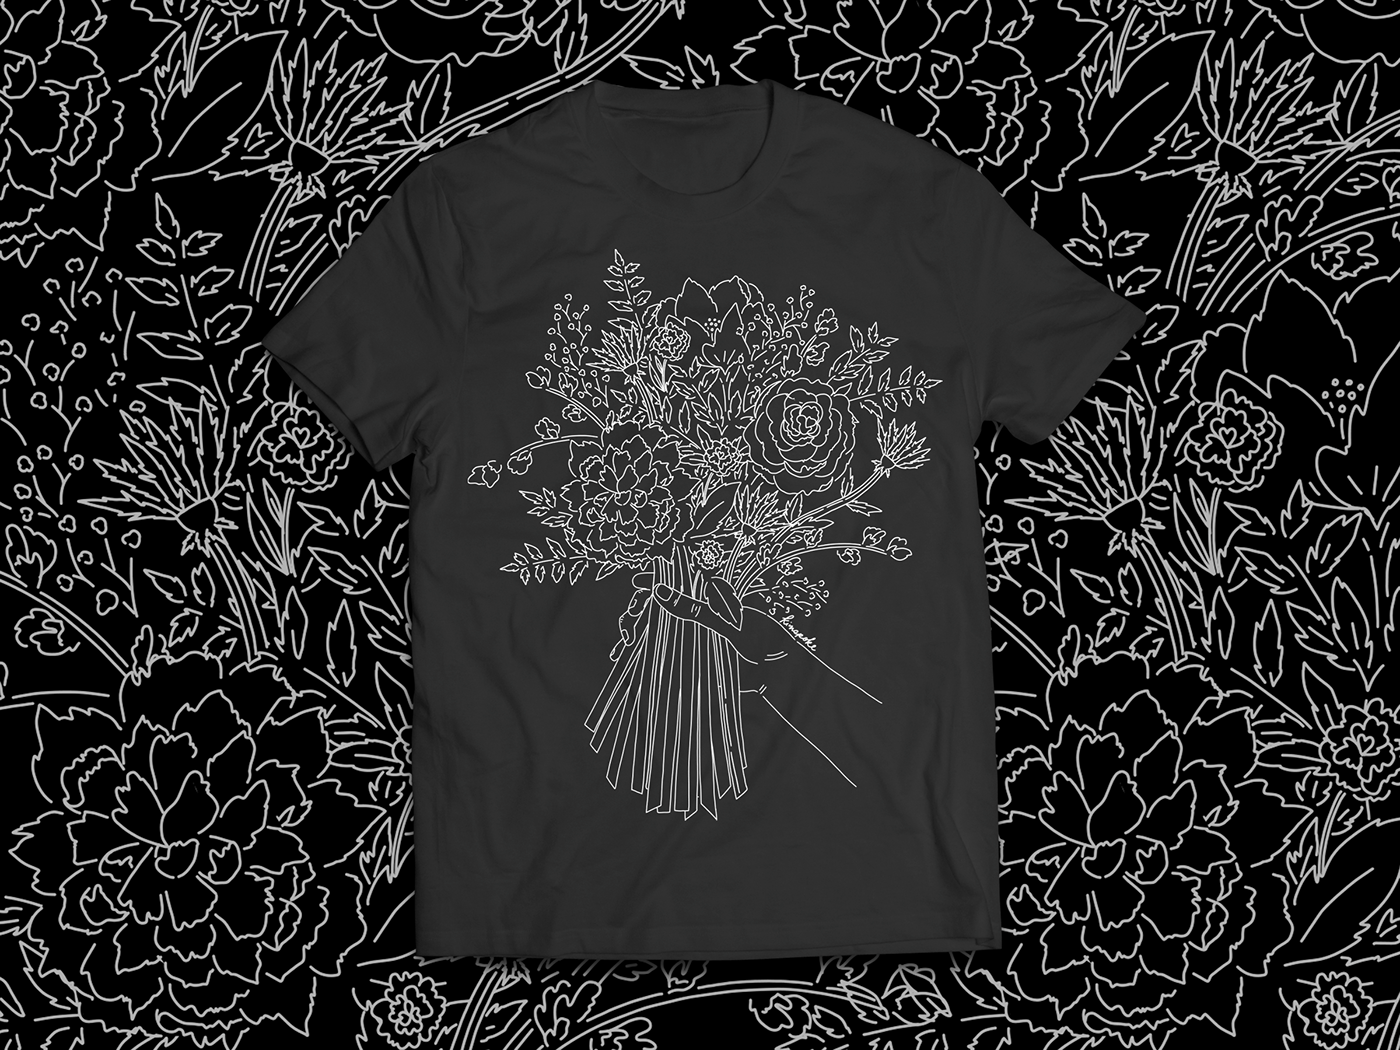 T-Shirt with Bouquet of Flowers